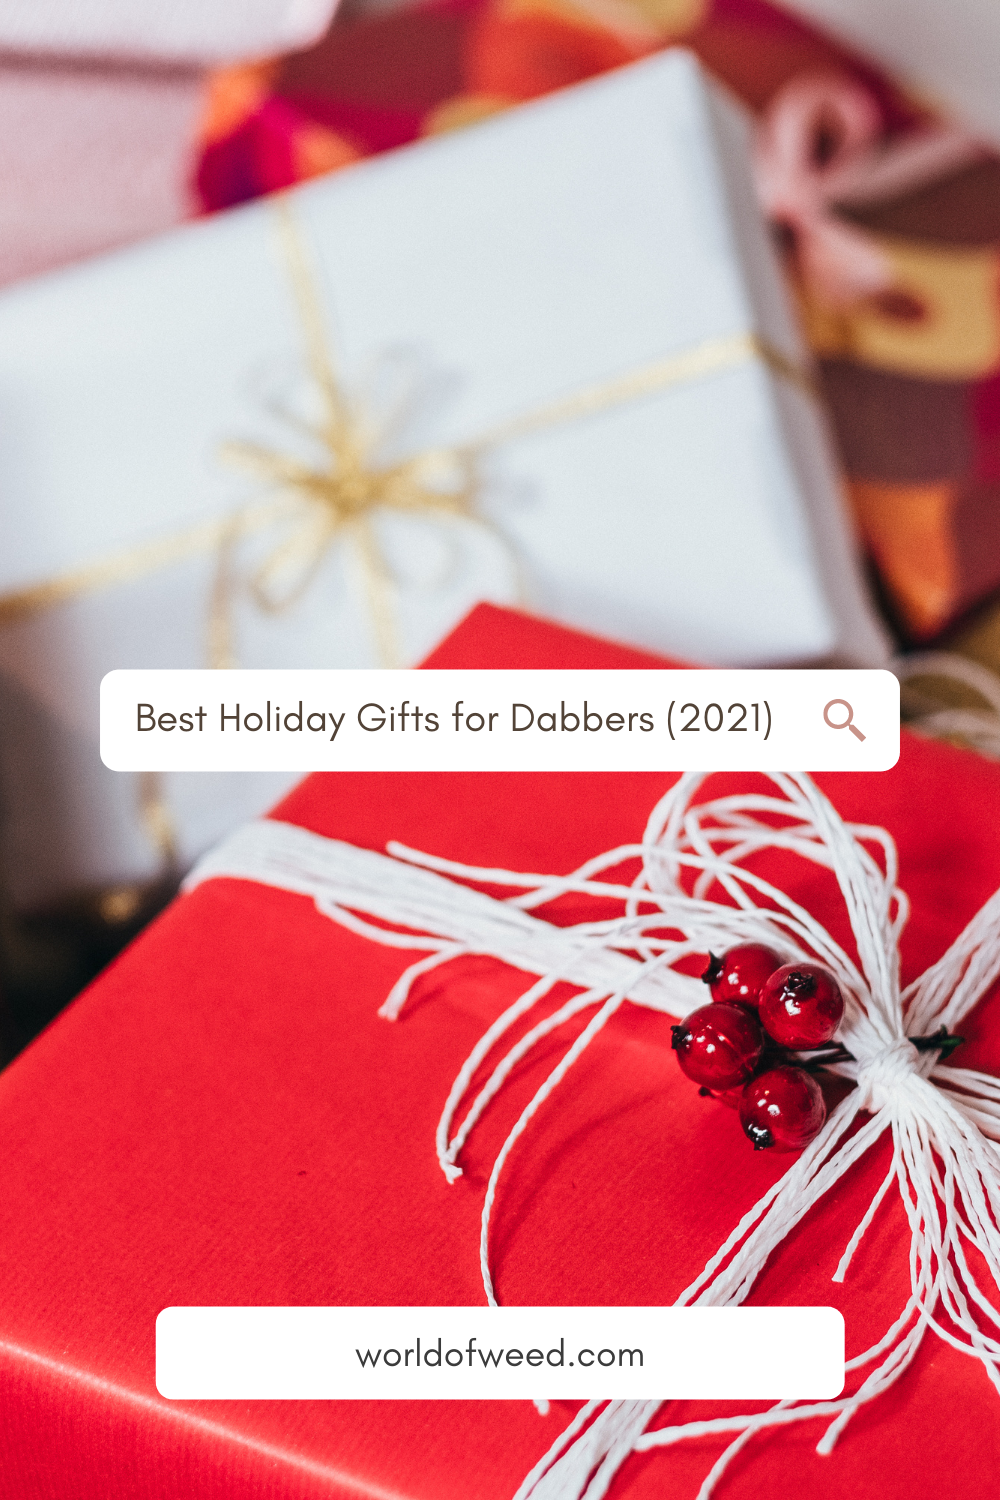 Best Holiday Gifts for Dab Lovers (2021)